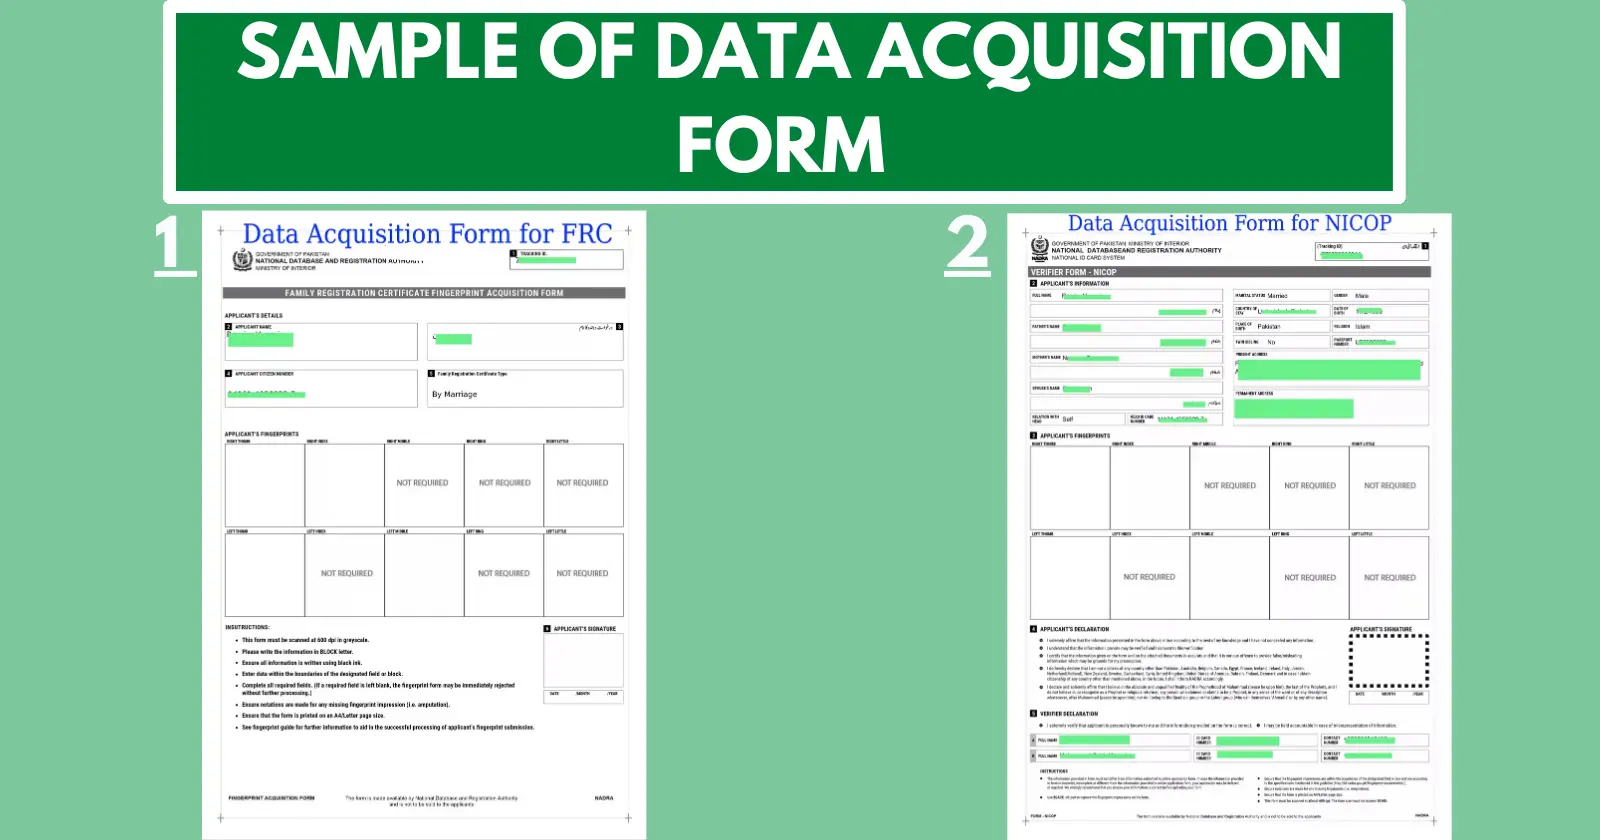 Upload NADRA Data Acquisition Form Now: Step-by-Step Guide